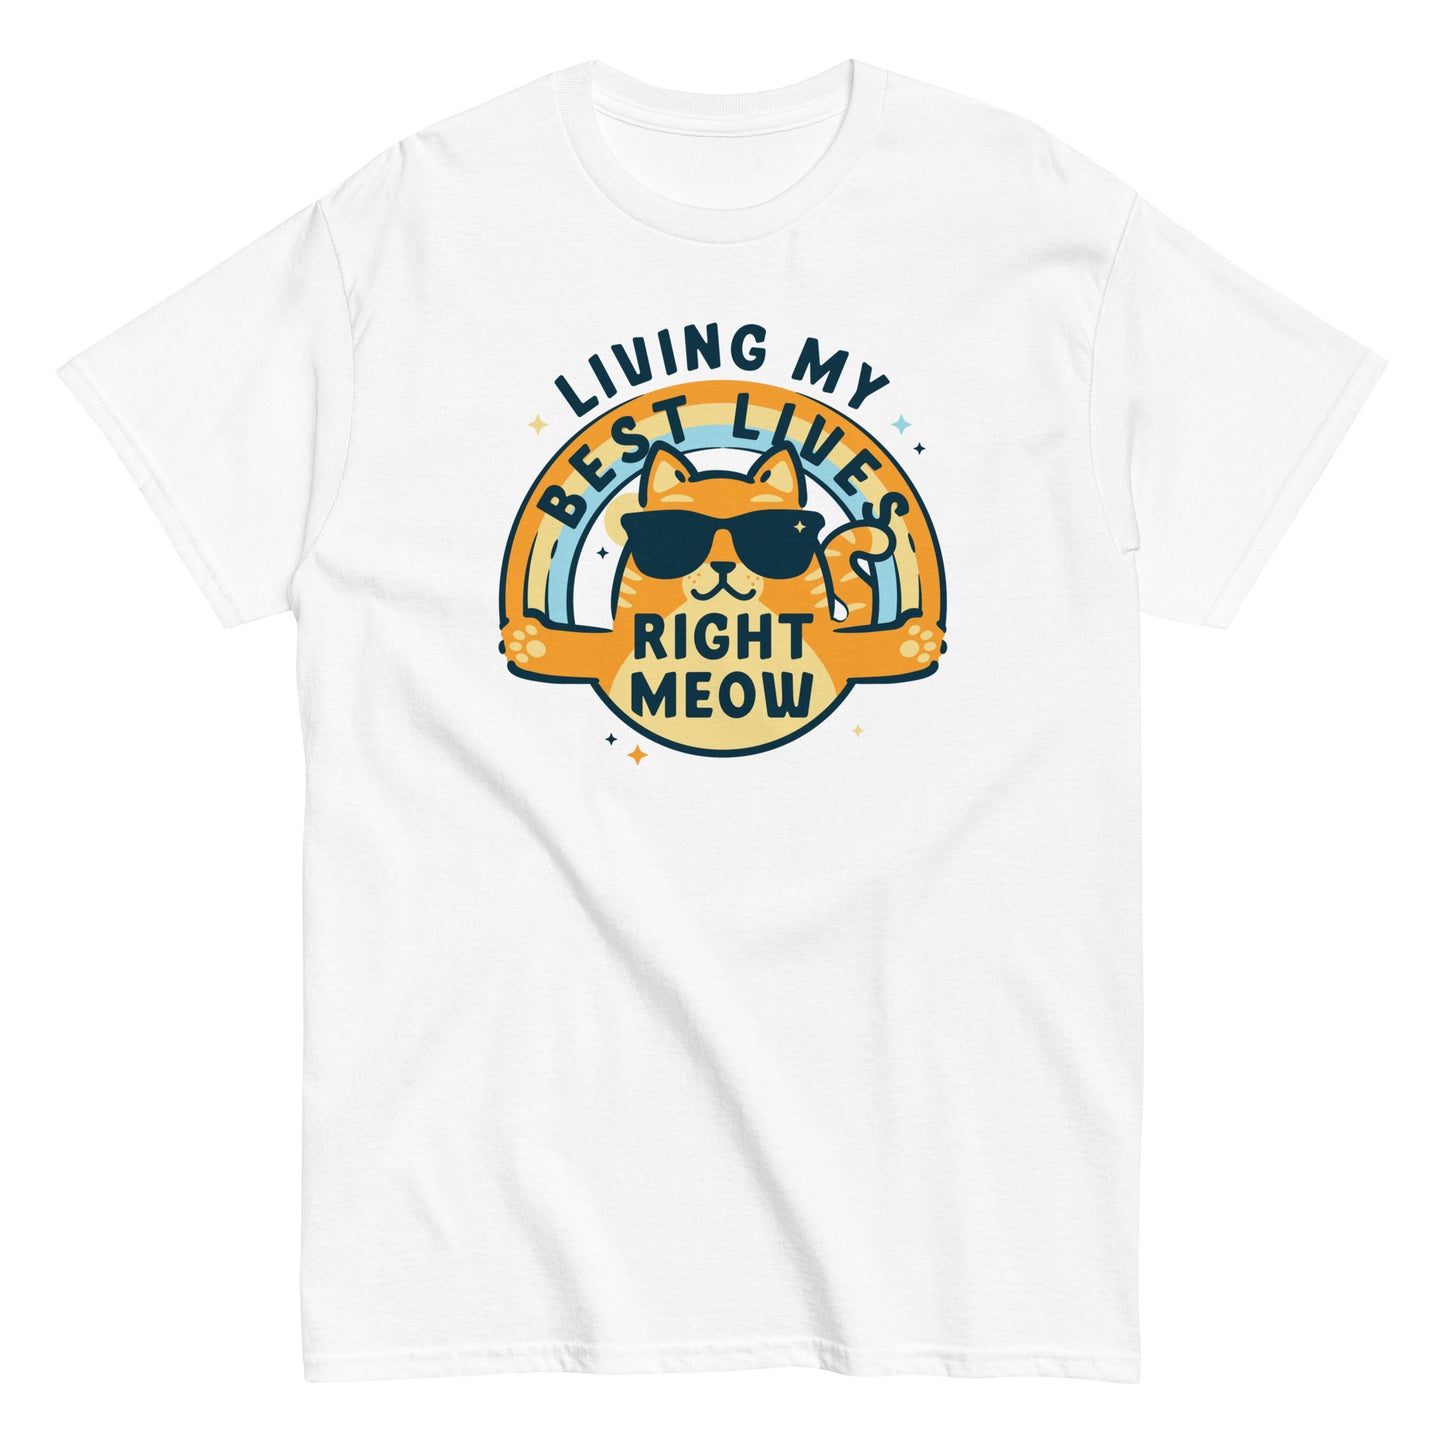 Living My Best Lives Right Meow Men's Classic Tee